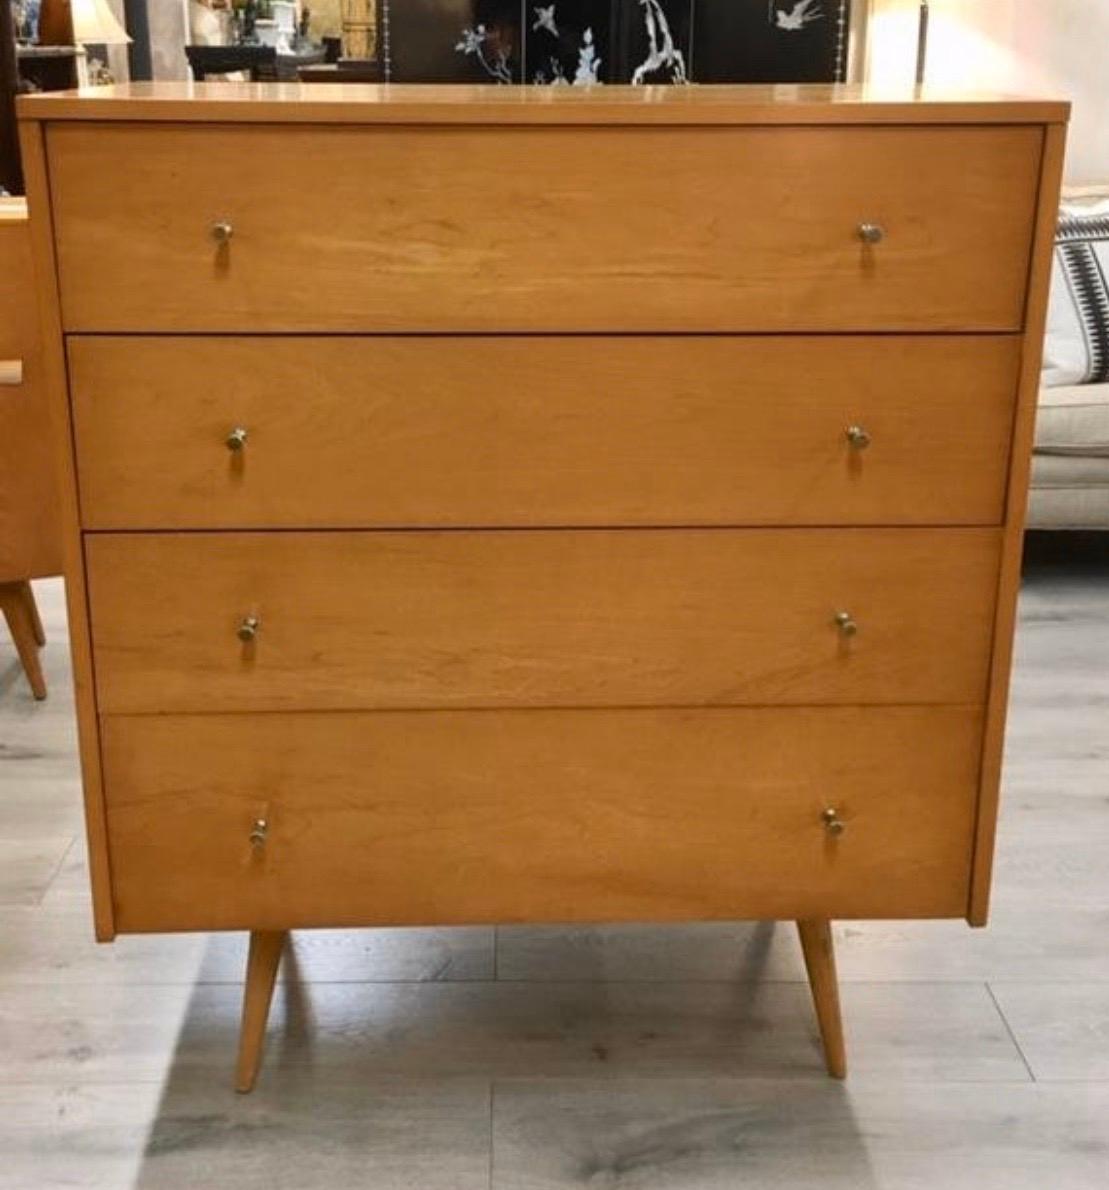 Iconic Paul McCobb Planner Group beauty. The four drawer dresser is all original and sports the famed peg legs and original drawer pulls. The wood is maple and the scale and lines are second to none.